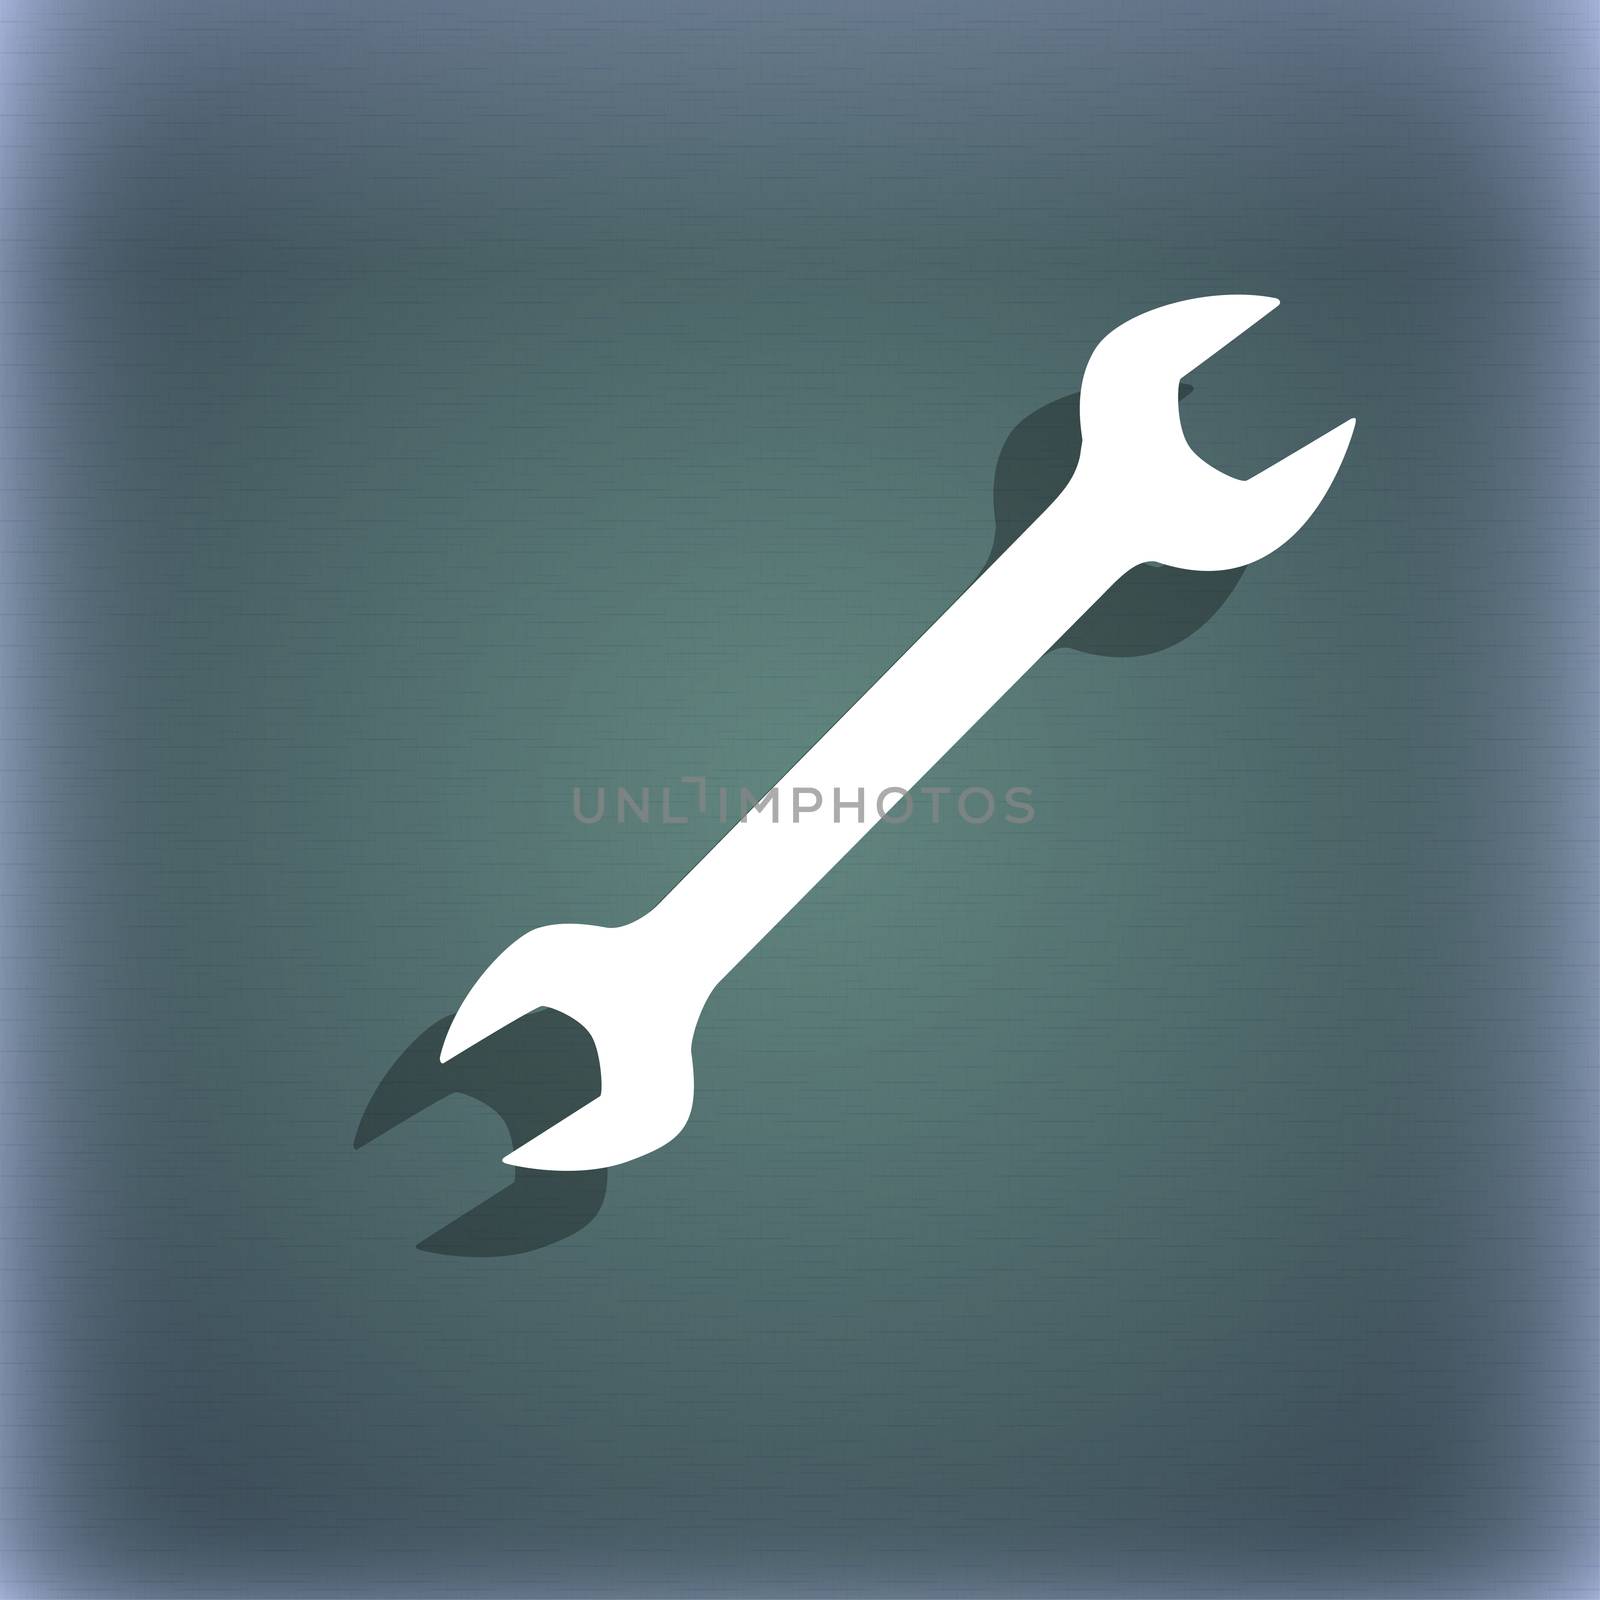 wrench icon symbol on the blue-green abstract background with shadow and space for your text. illustration